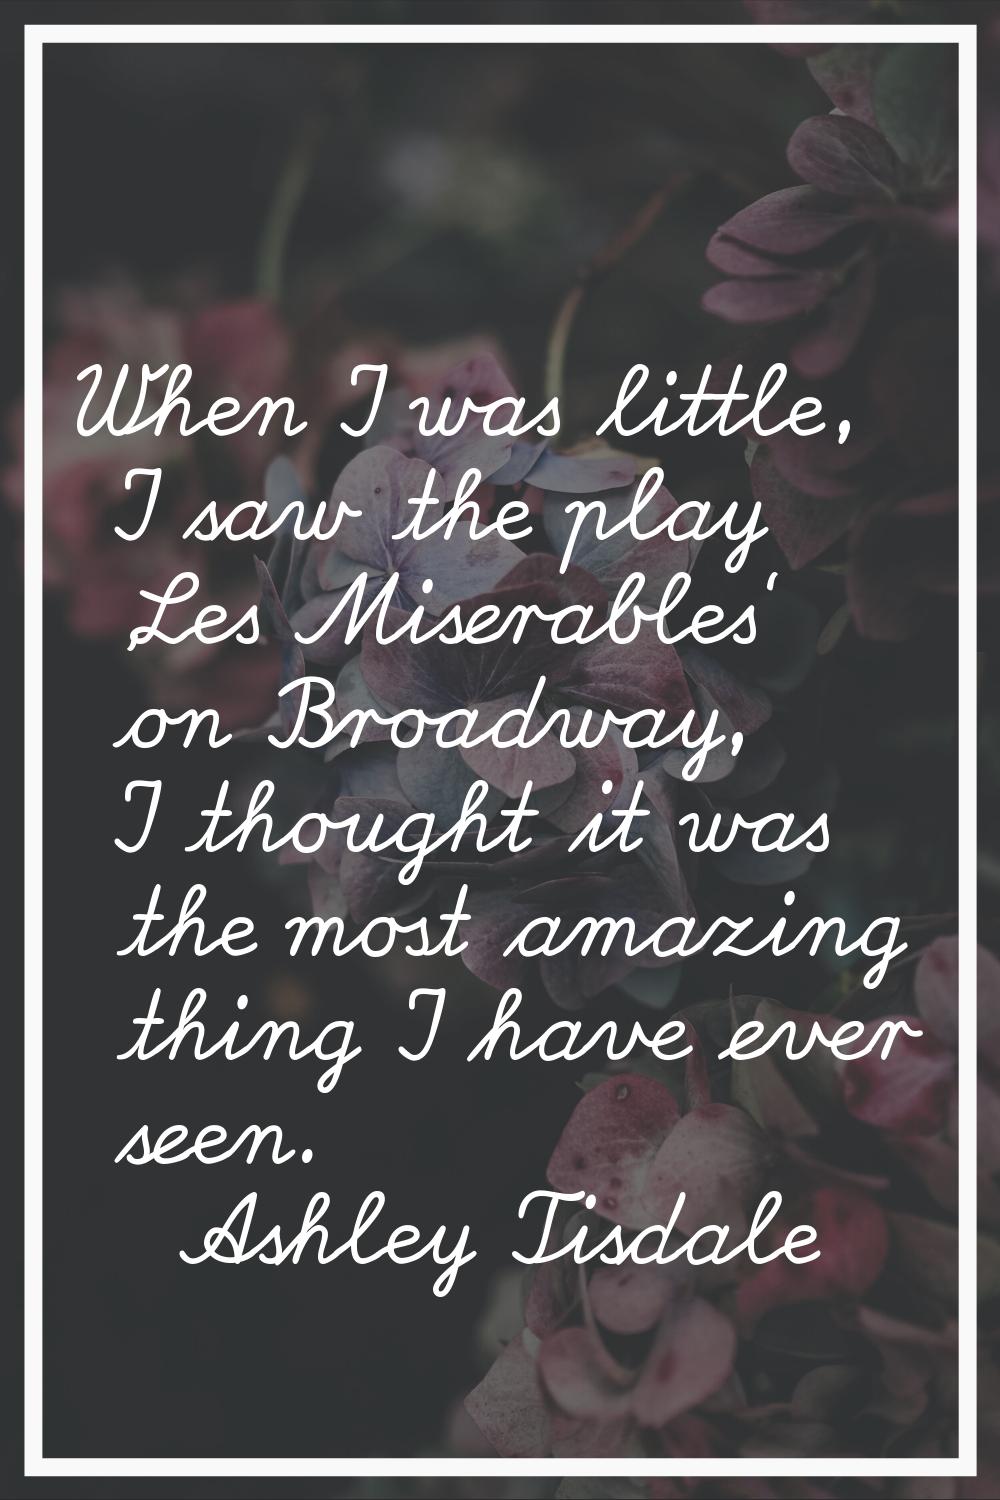 When I was little, I saw the play 'Les Miserables' on Broadway, I thought it was the most amazing t